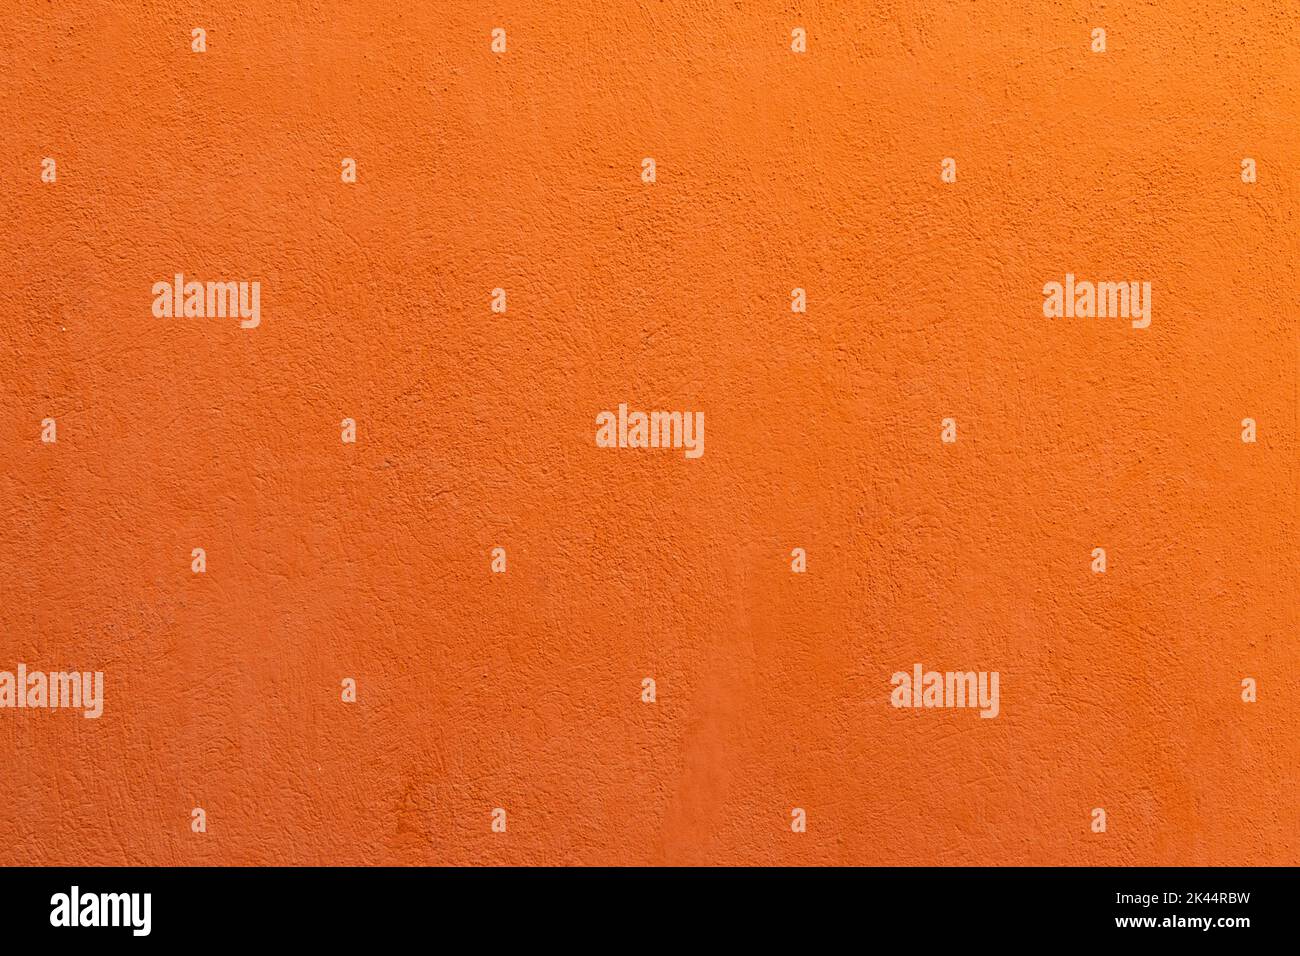 Orange painted wall texture background. Stock Photo